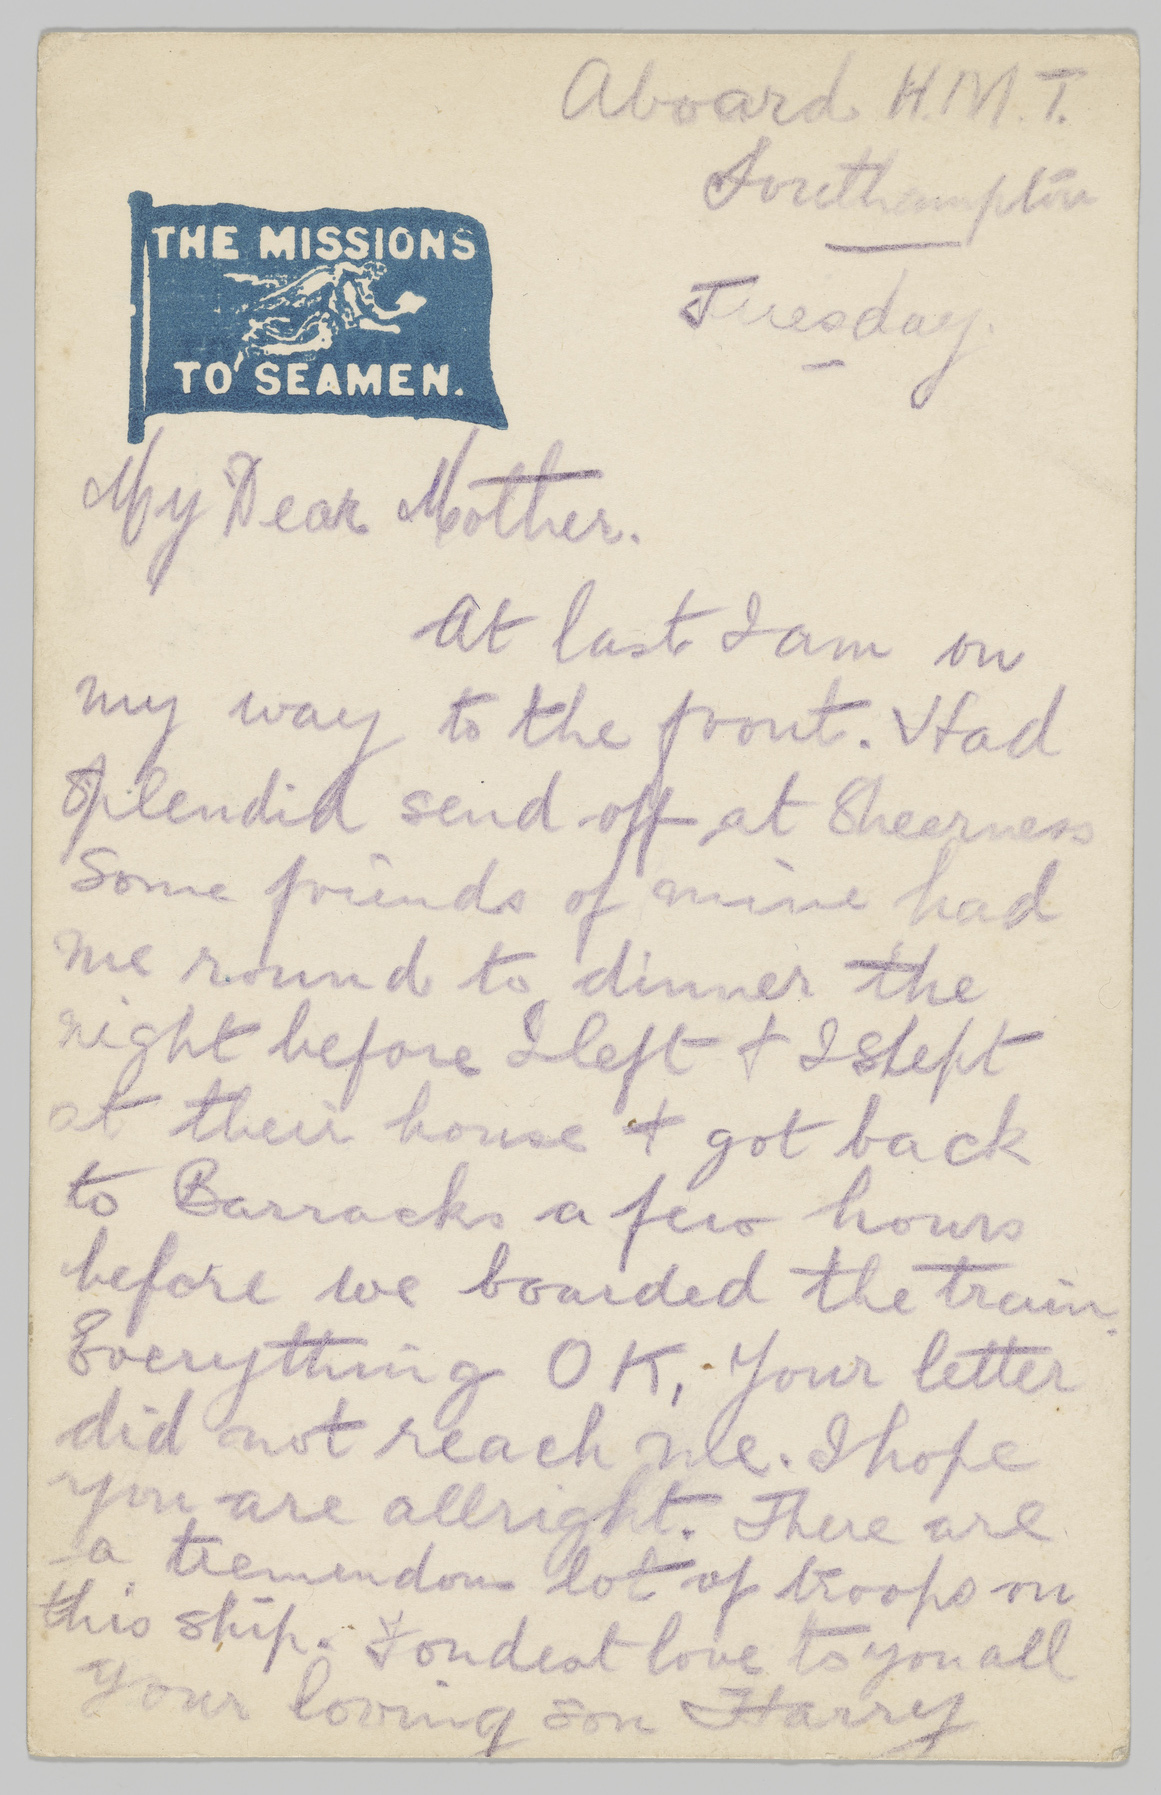 Postcard written portrait with the annotation 'Aboard HMT Southampton' in the top right corner.